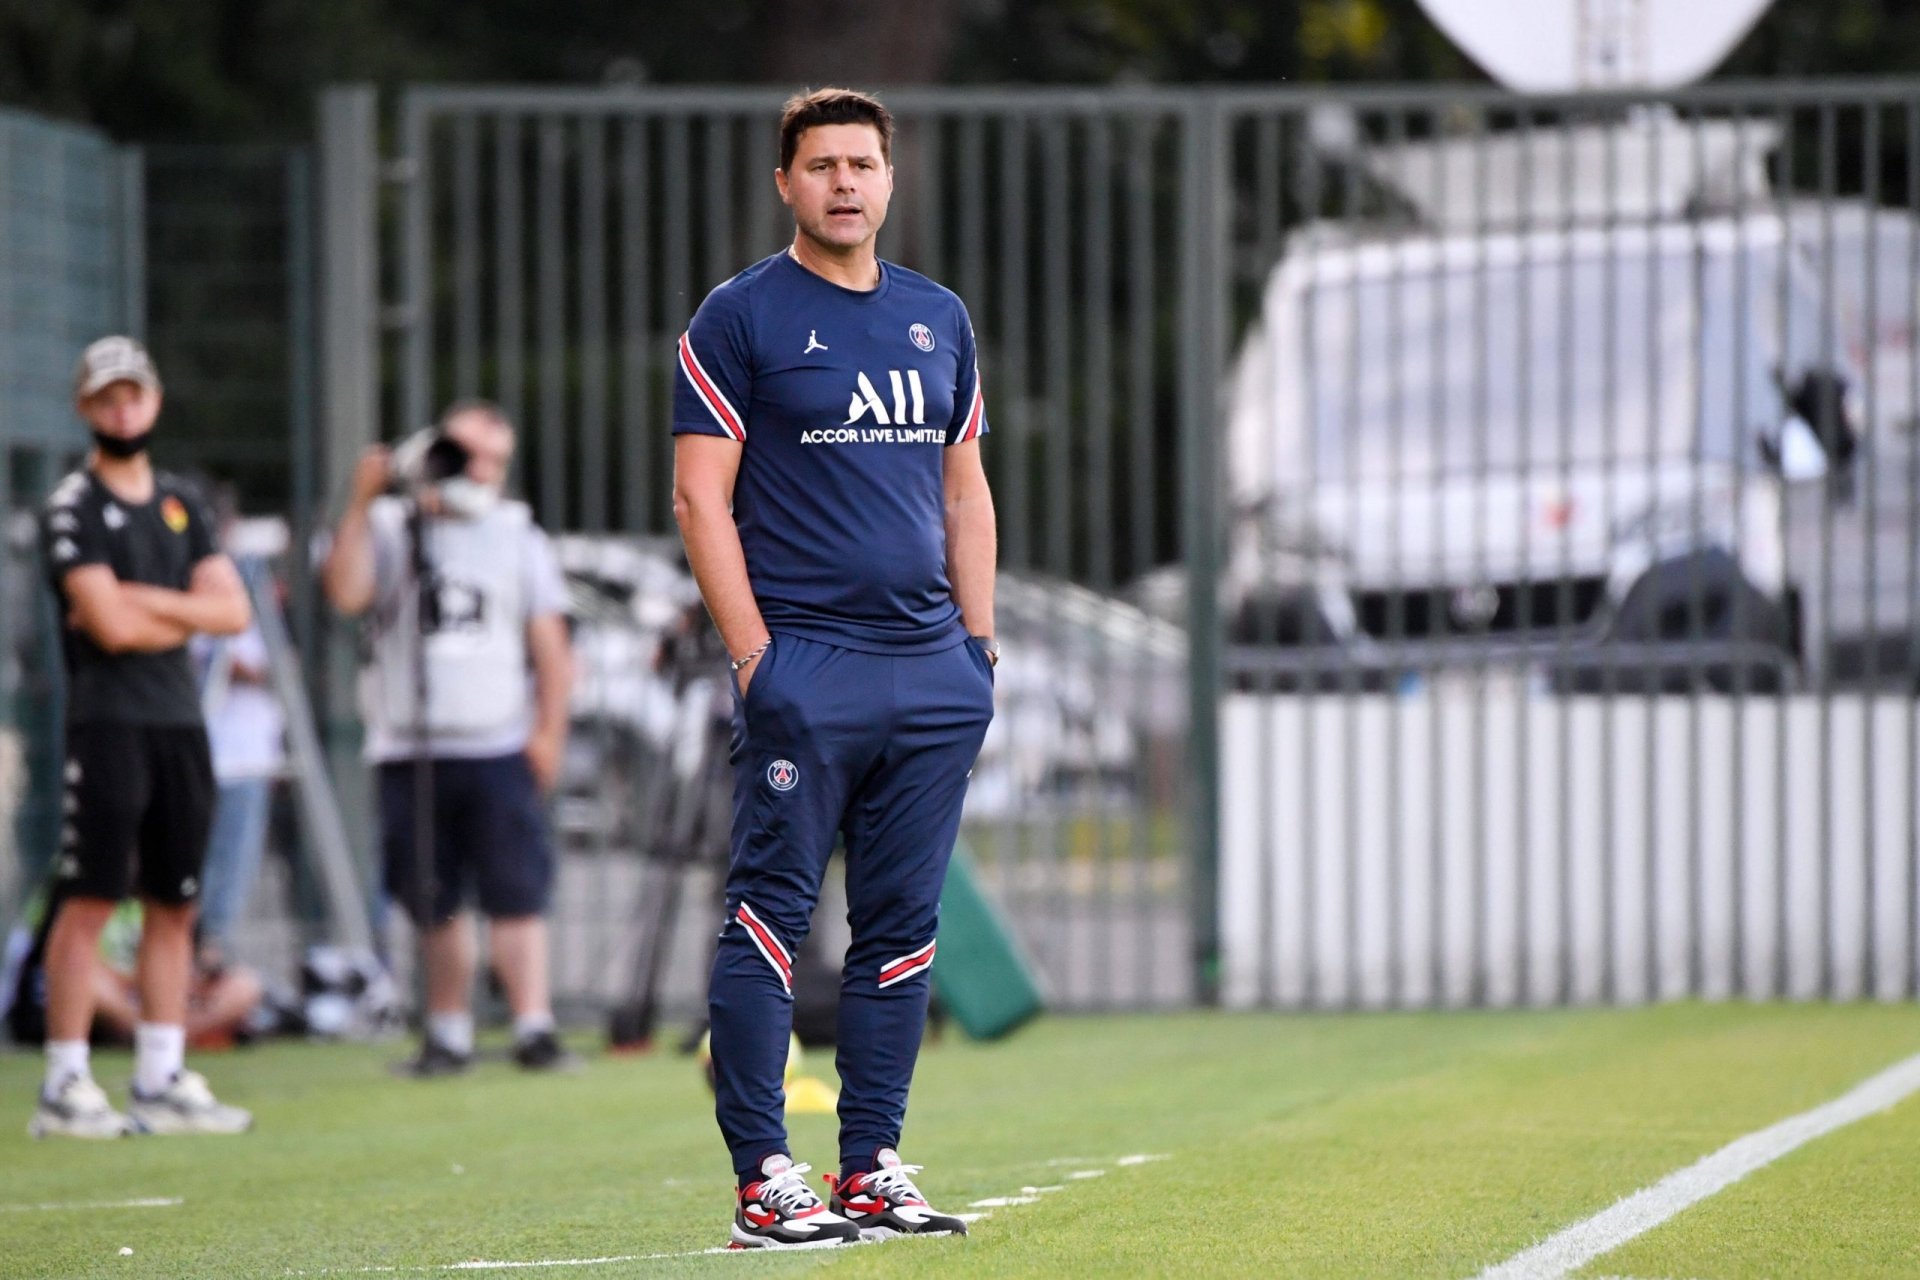 Pochettino is the number one choice for the position of MU coach next season